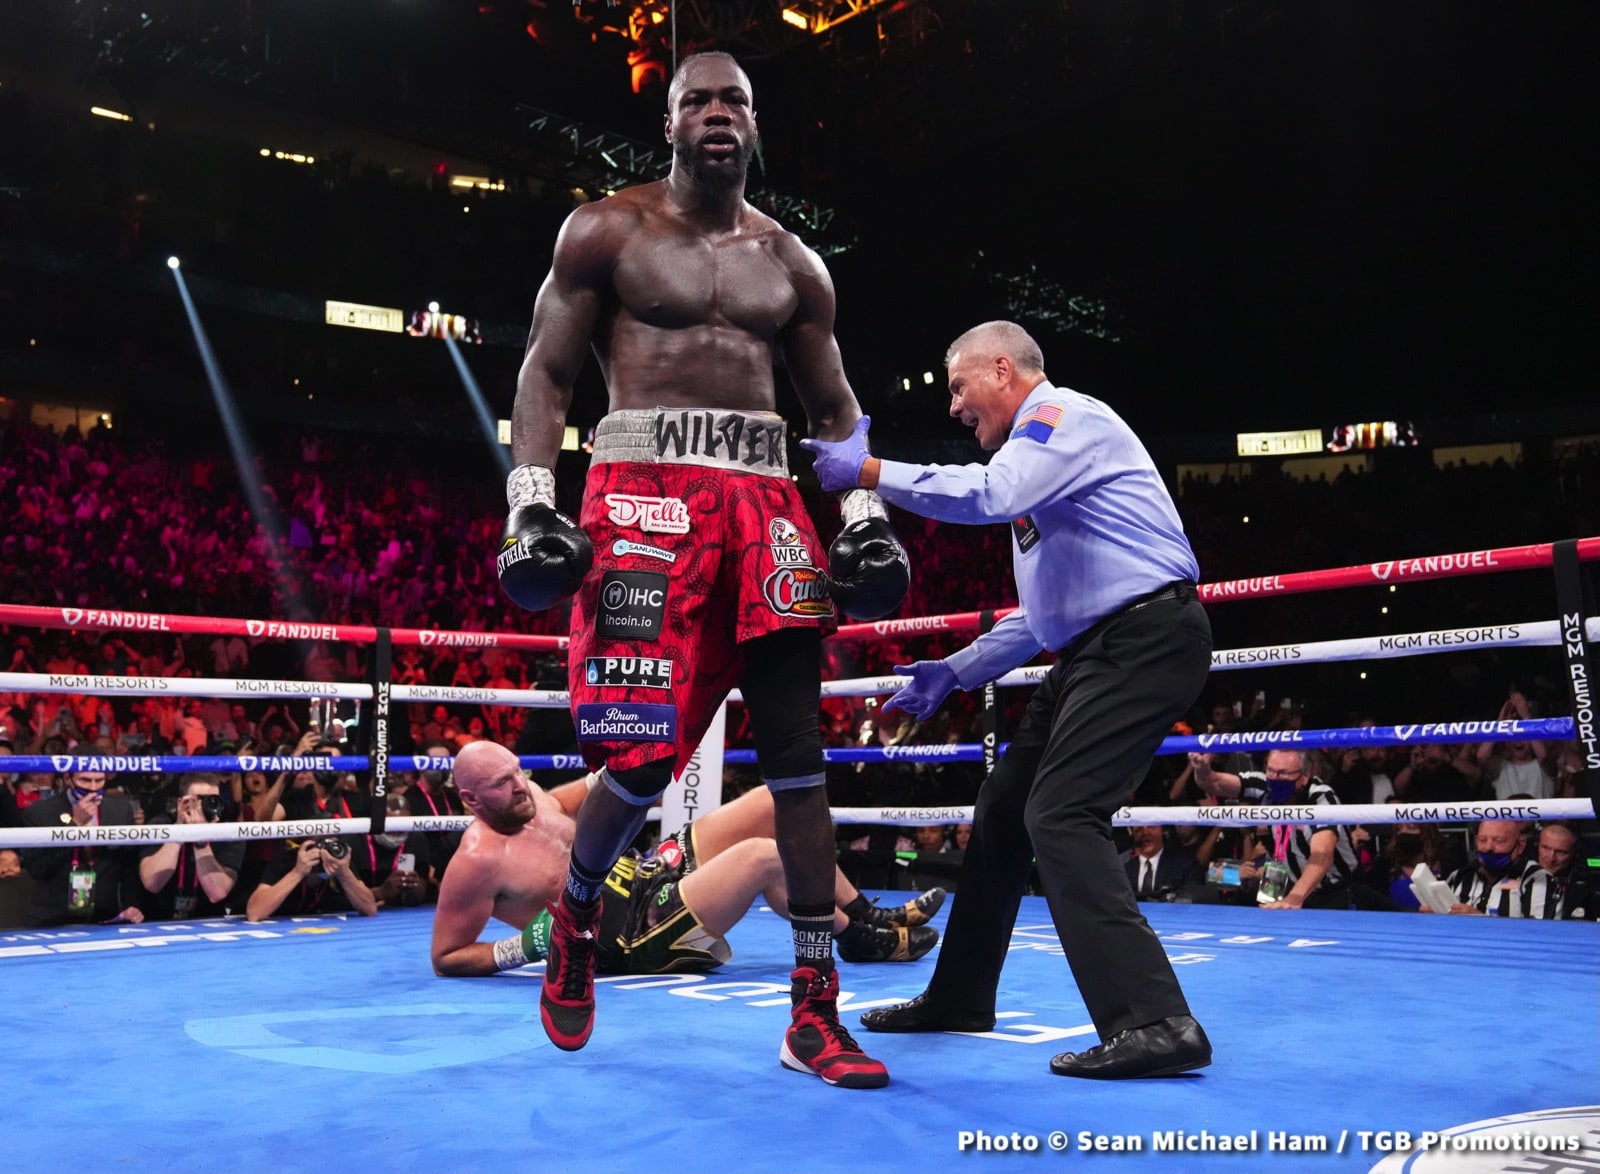 Deontay Wilder clocks in fastest knockouts per fight ahead of potential title bout, Fury follows in close second